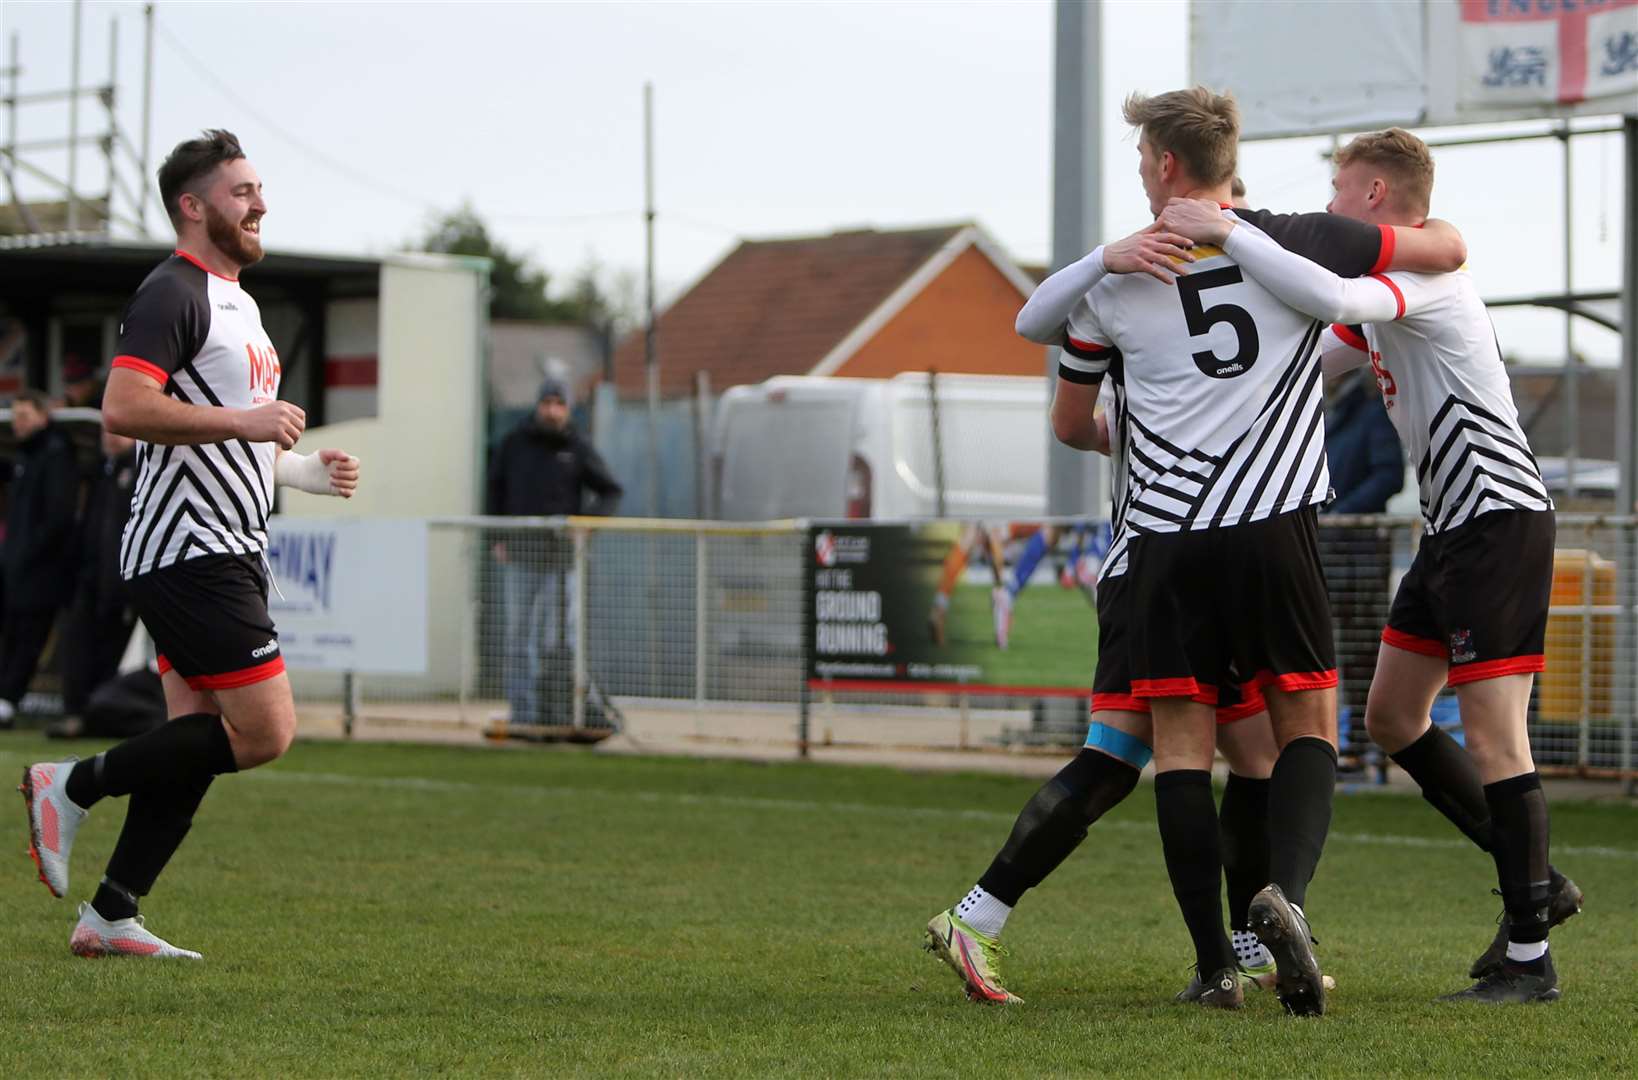 Scorer Connor Coyne joins Alex Green, who supplied the cross for the winner, to celebrate with team-mates Kane Smith and Tom Chapman in Deal's 1-0 weekend win over Rusthall. Picture: Paul Willmott